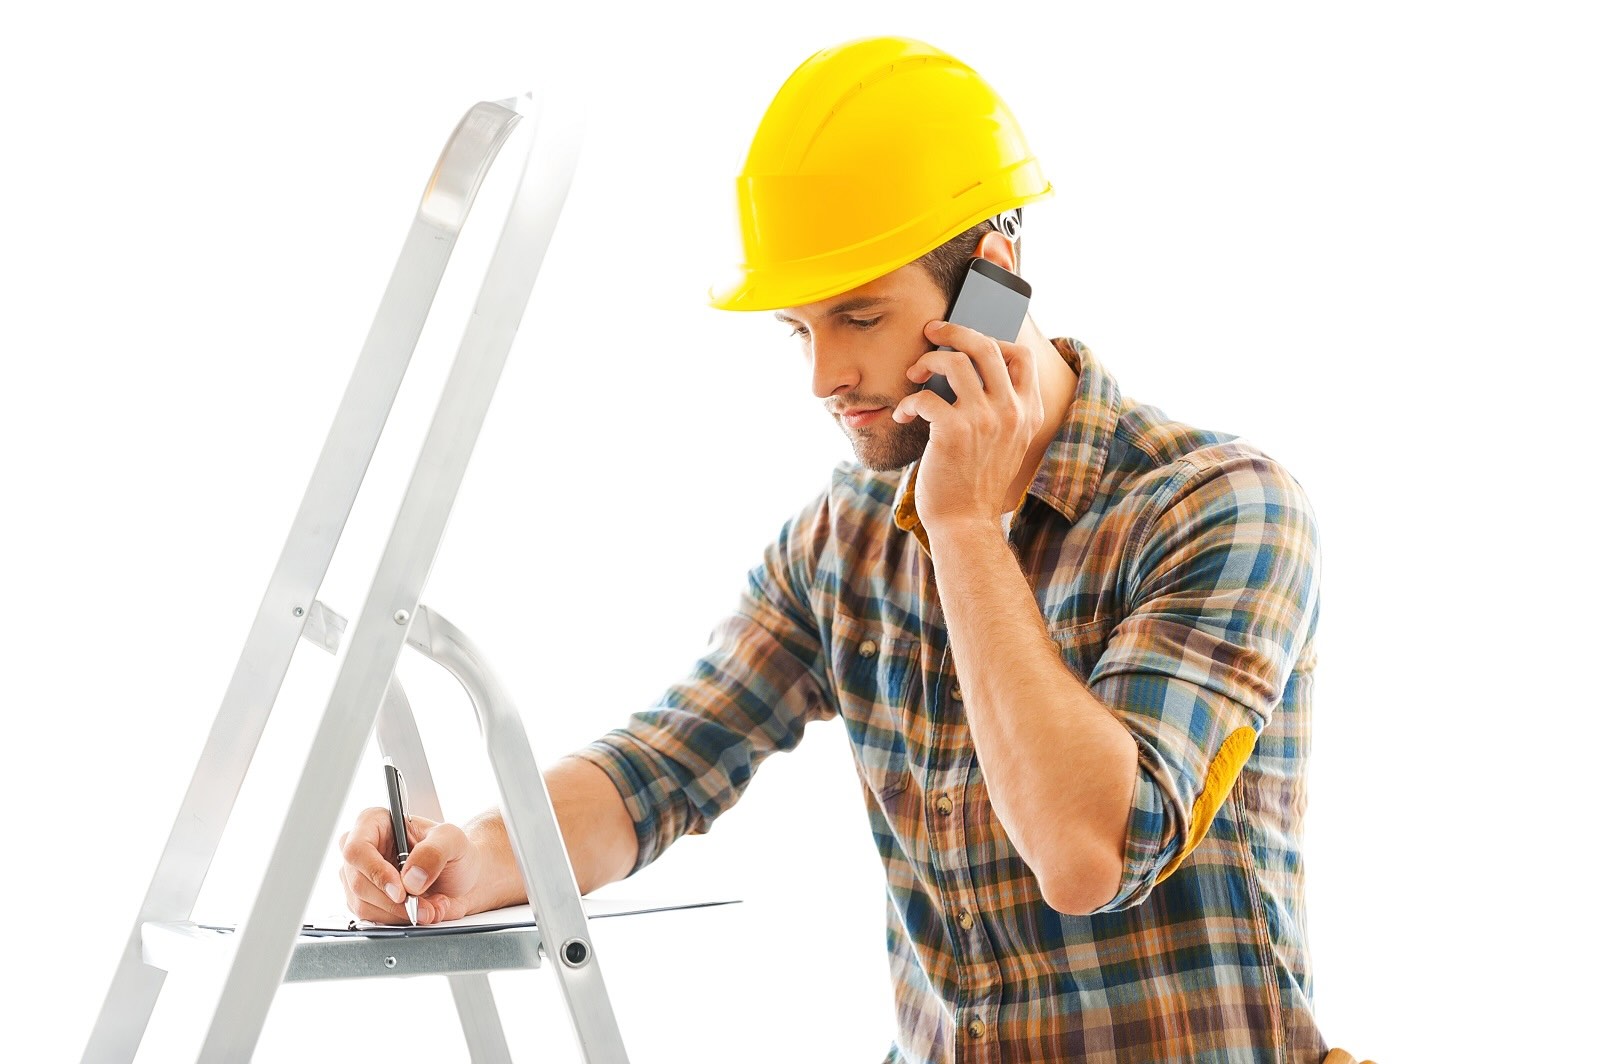 What Do You Need To Start Your Own Construction Company